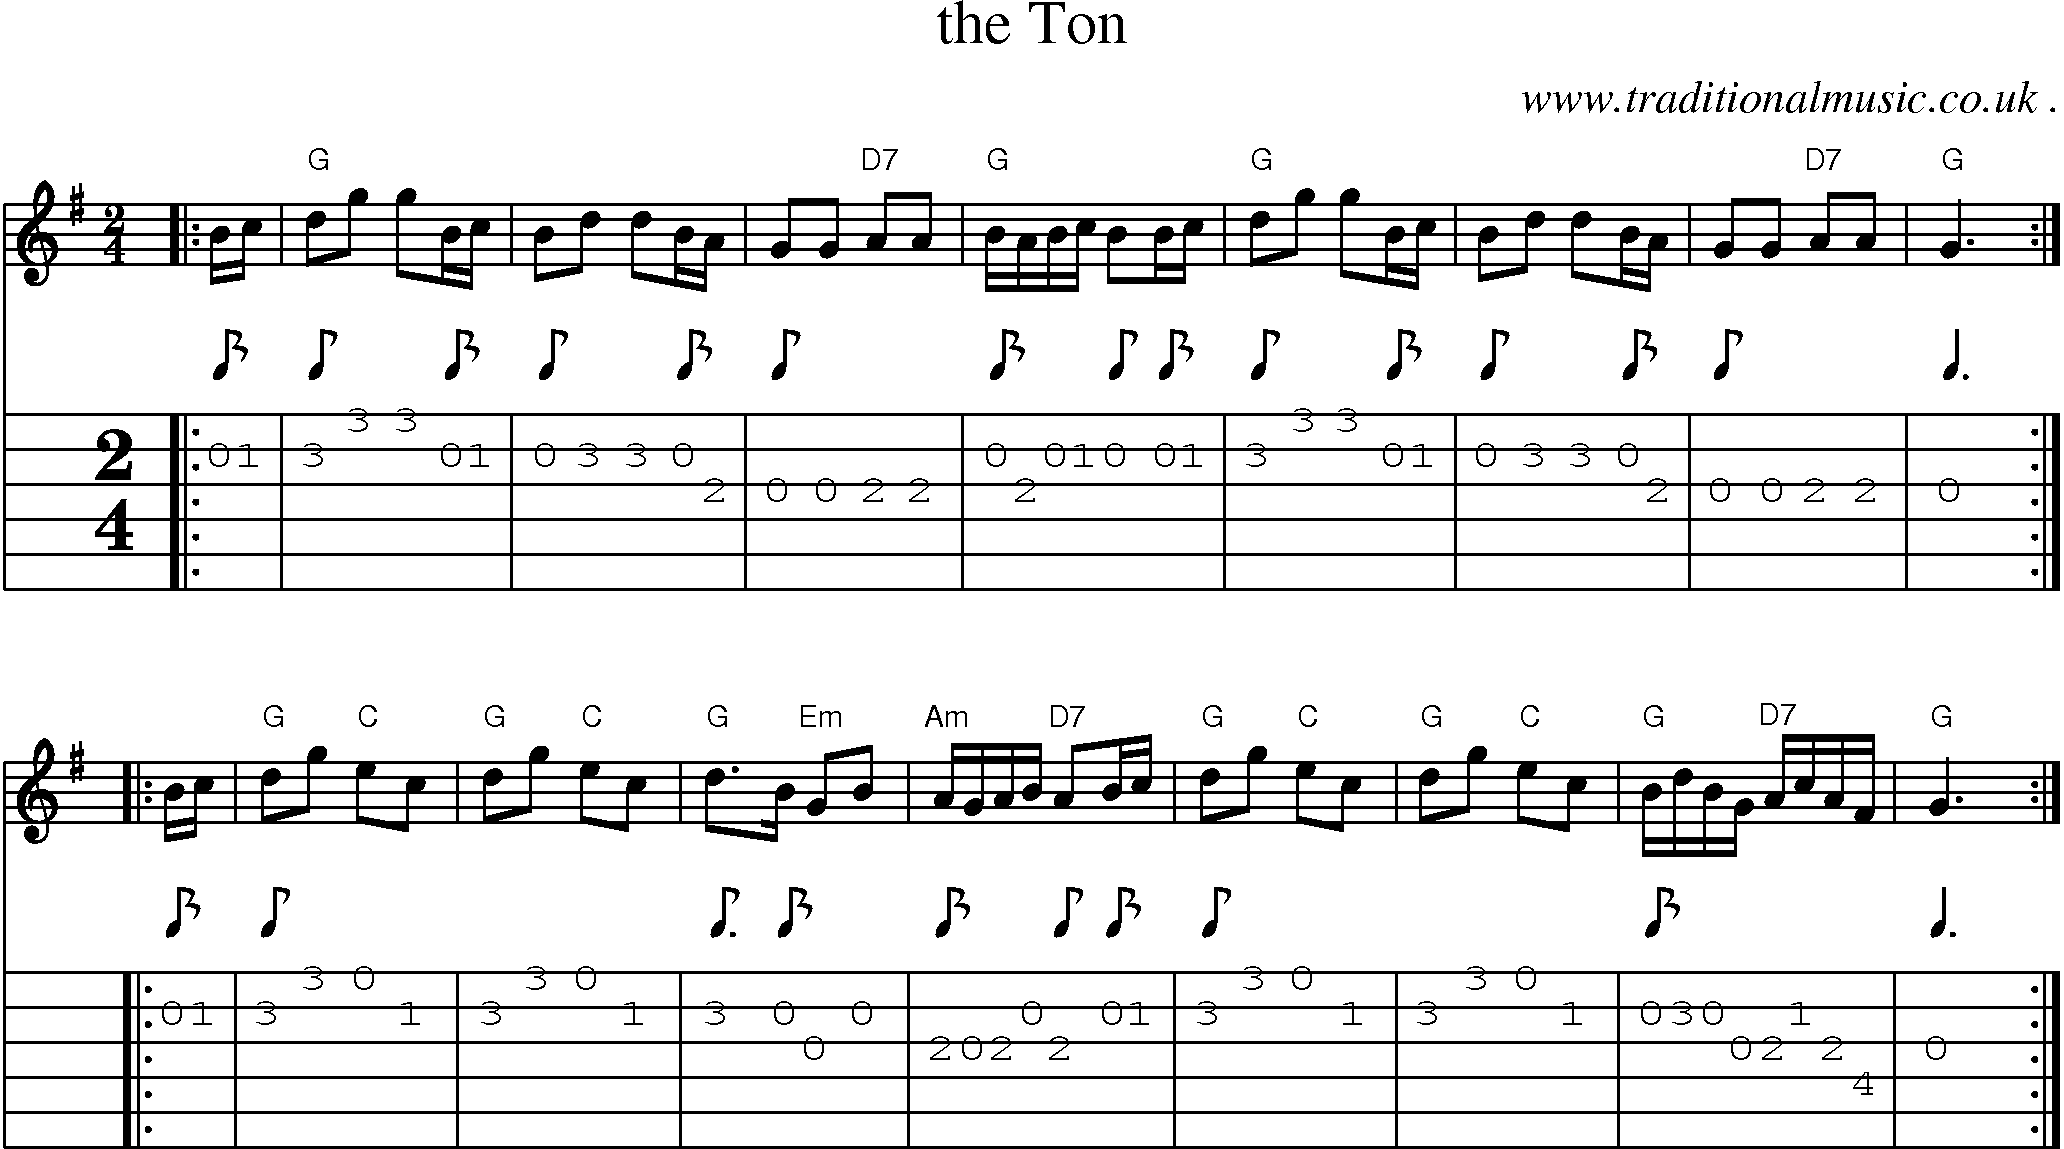 Sheet-music  score, Chords and Guitar Tabs for The Ton